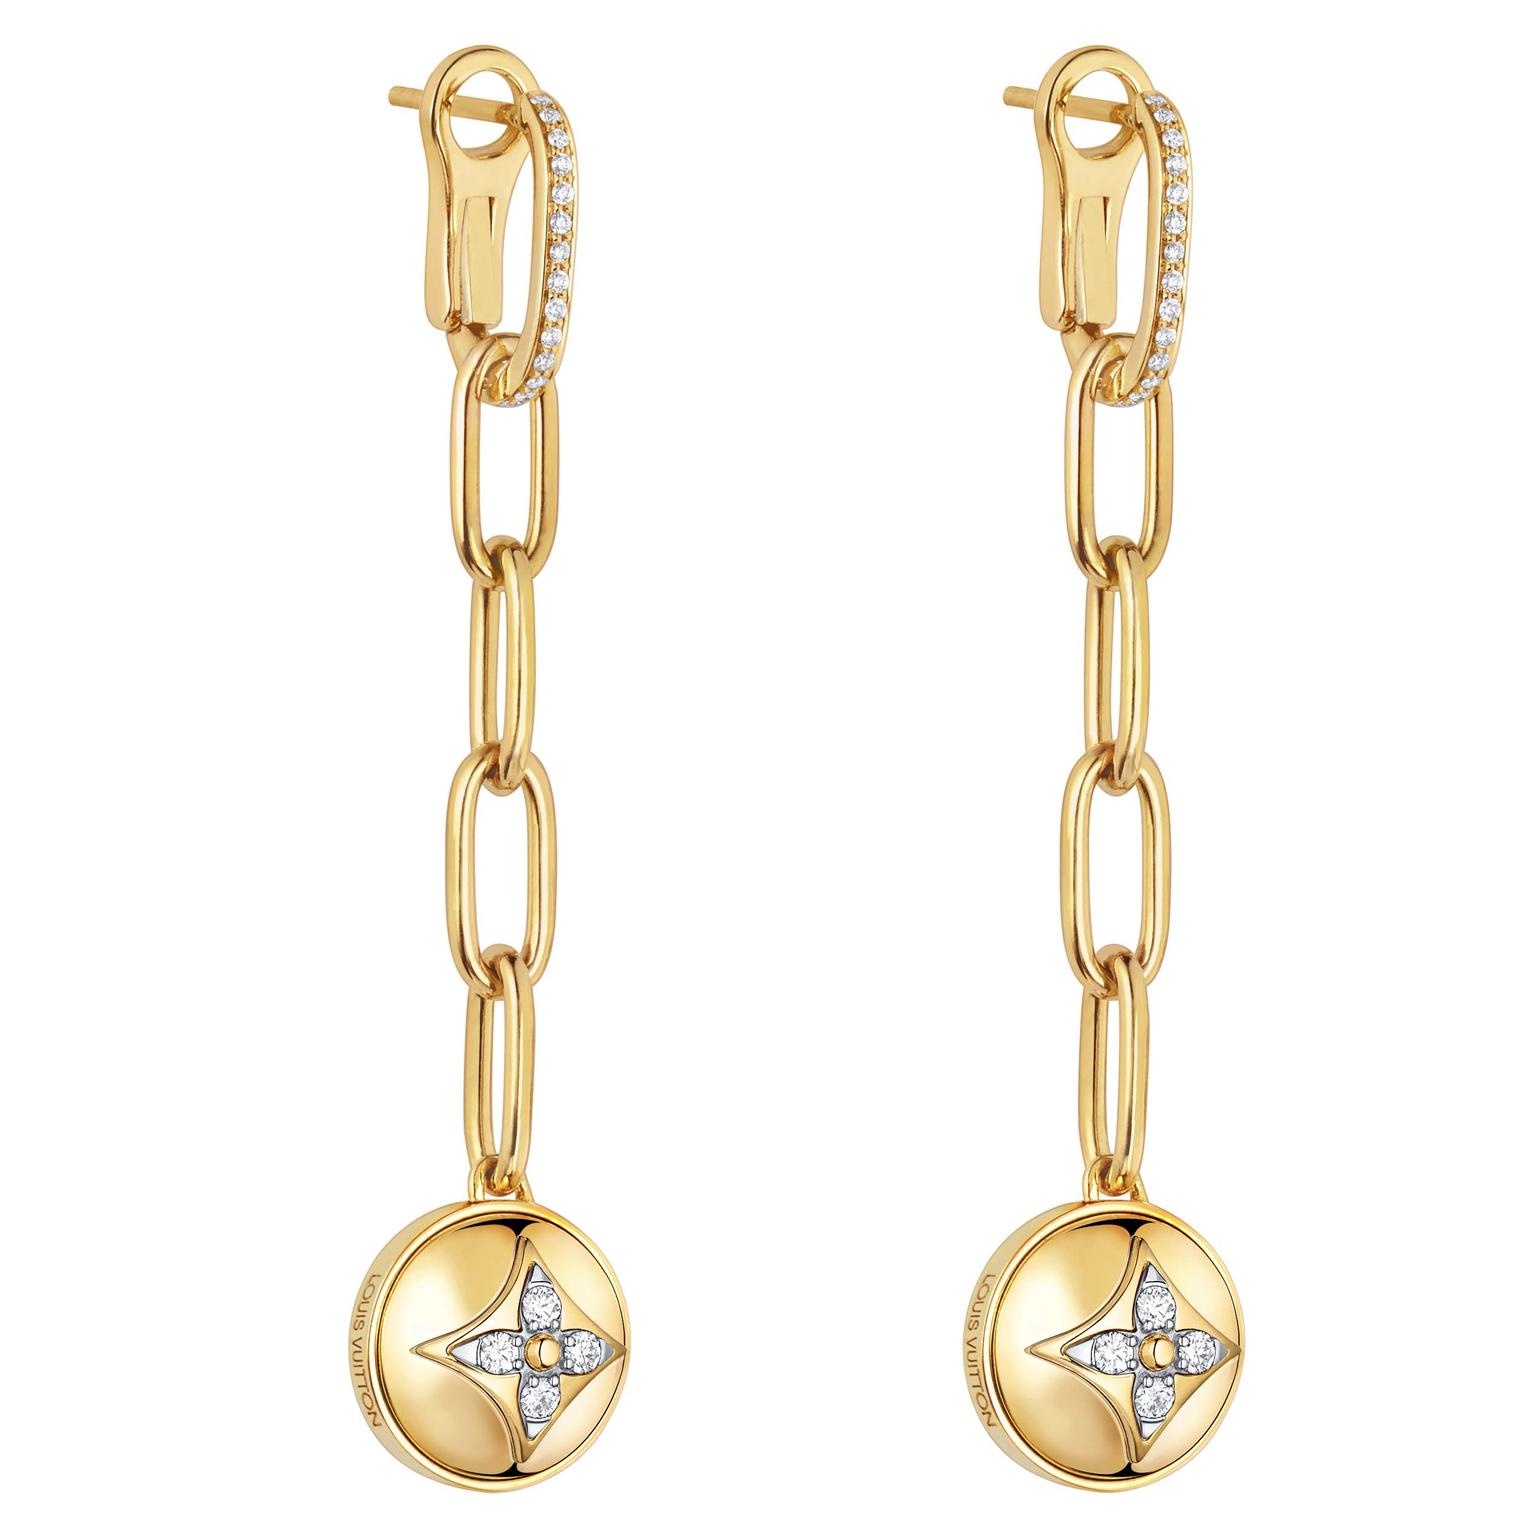 Lv iconic yellow gold earrings Louis Vuitton Gold in Yellow gold - 25351397